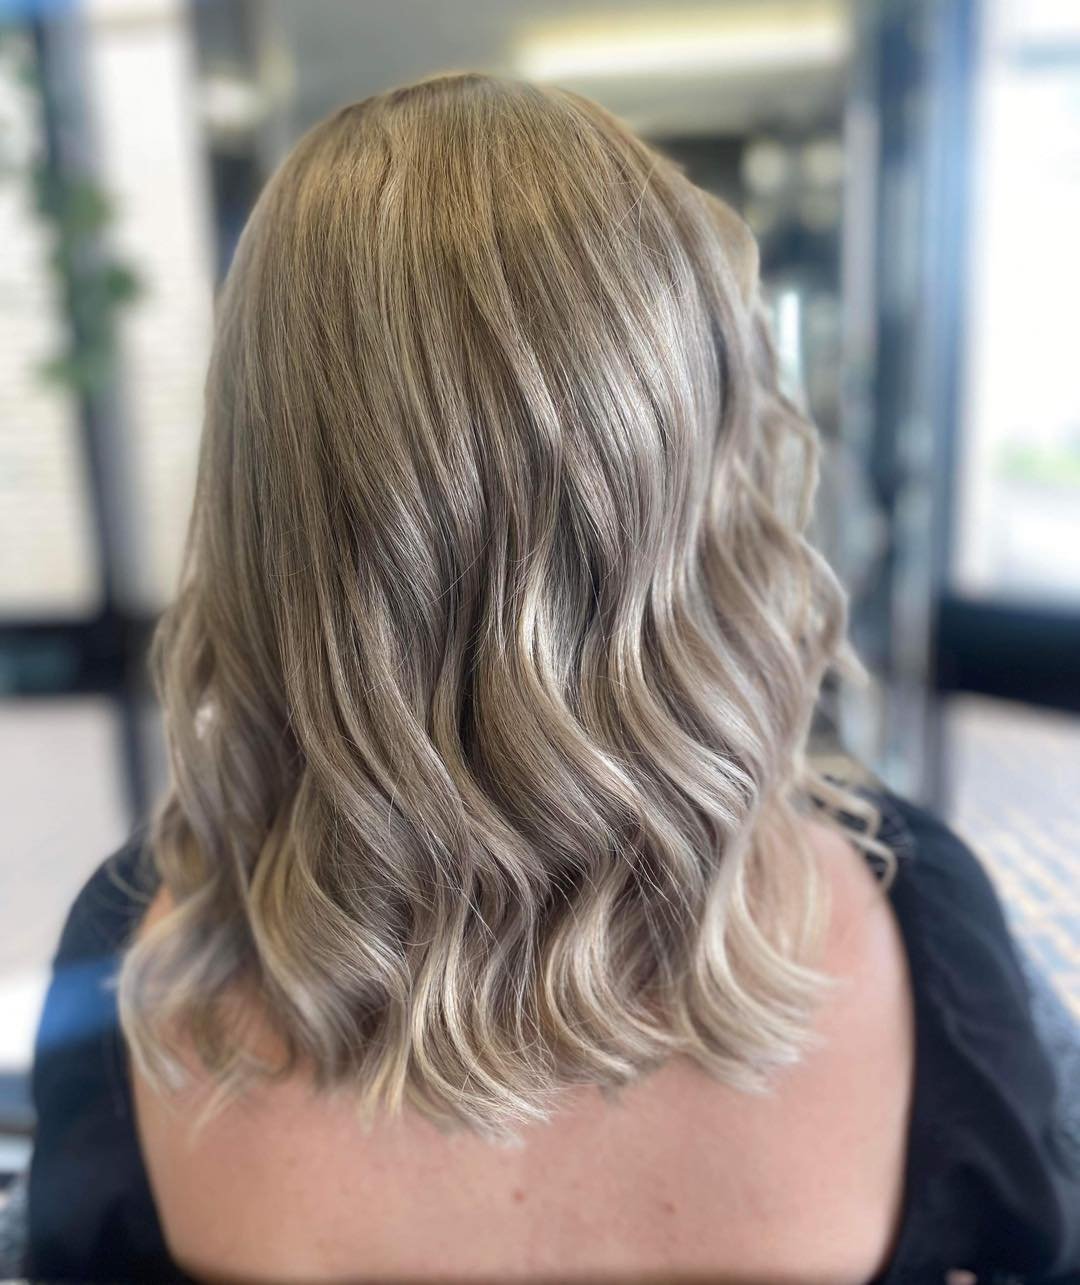 A stunning lived-in blonde that we absolutely adore! ✨ 

.
.
.

📞 (07) 4317 4192
🌐 www.iconsalonshb.comau
📍 1/40 Torquay Road Pialba QLD

.
.
.

#hairdresserherveybay #hairsalonherveybay #beautysalonherveybay #salonherveybay #cosmetictatooherveyba